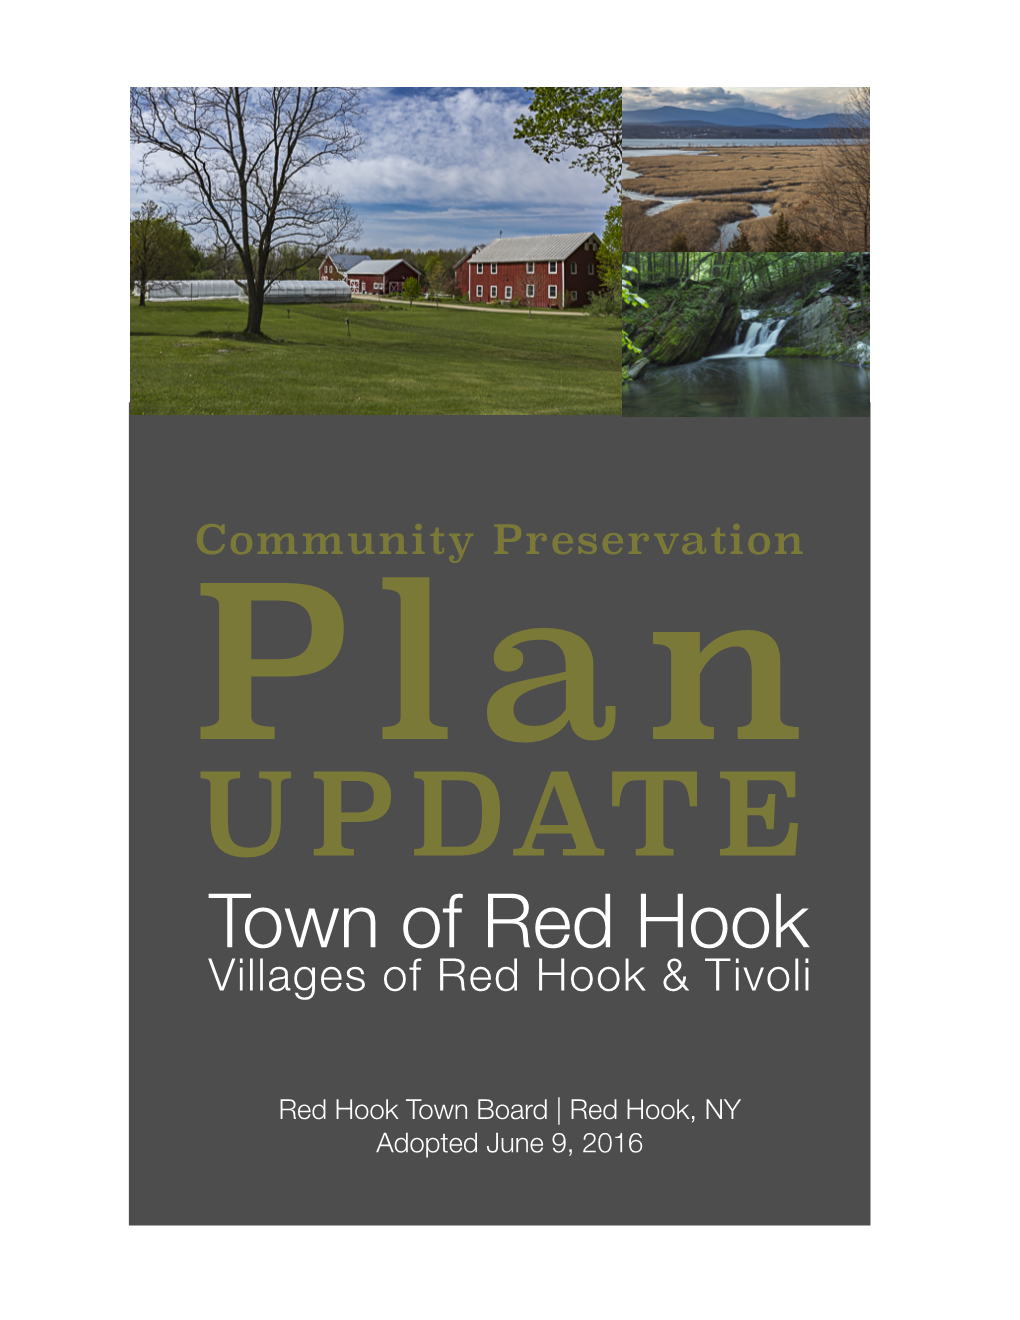 Community Preservation Plan UPDATE Town of Red Hook Villages of Red Hook & Tivoli